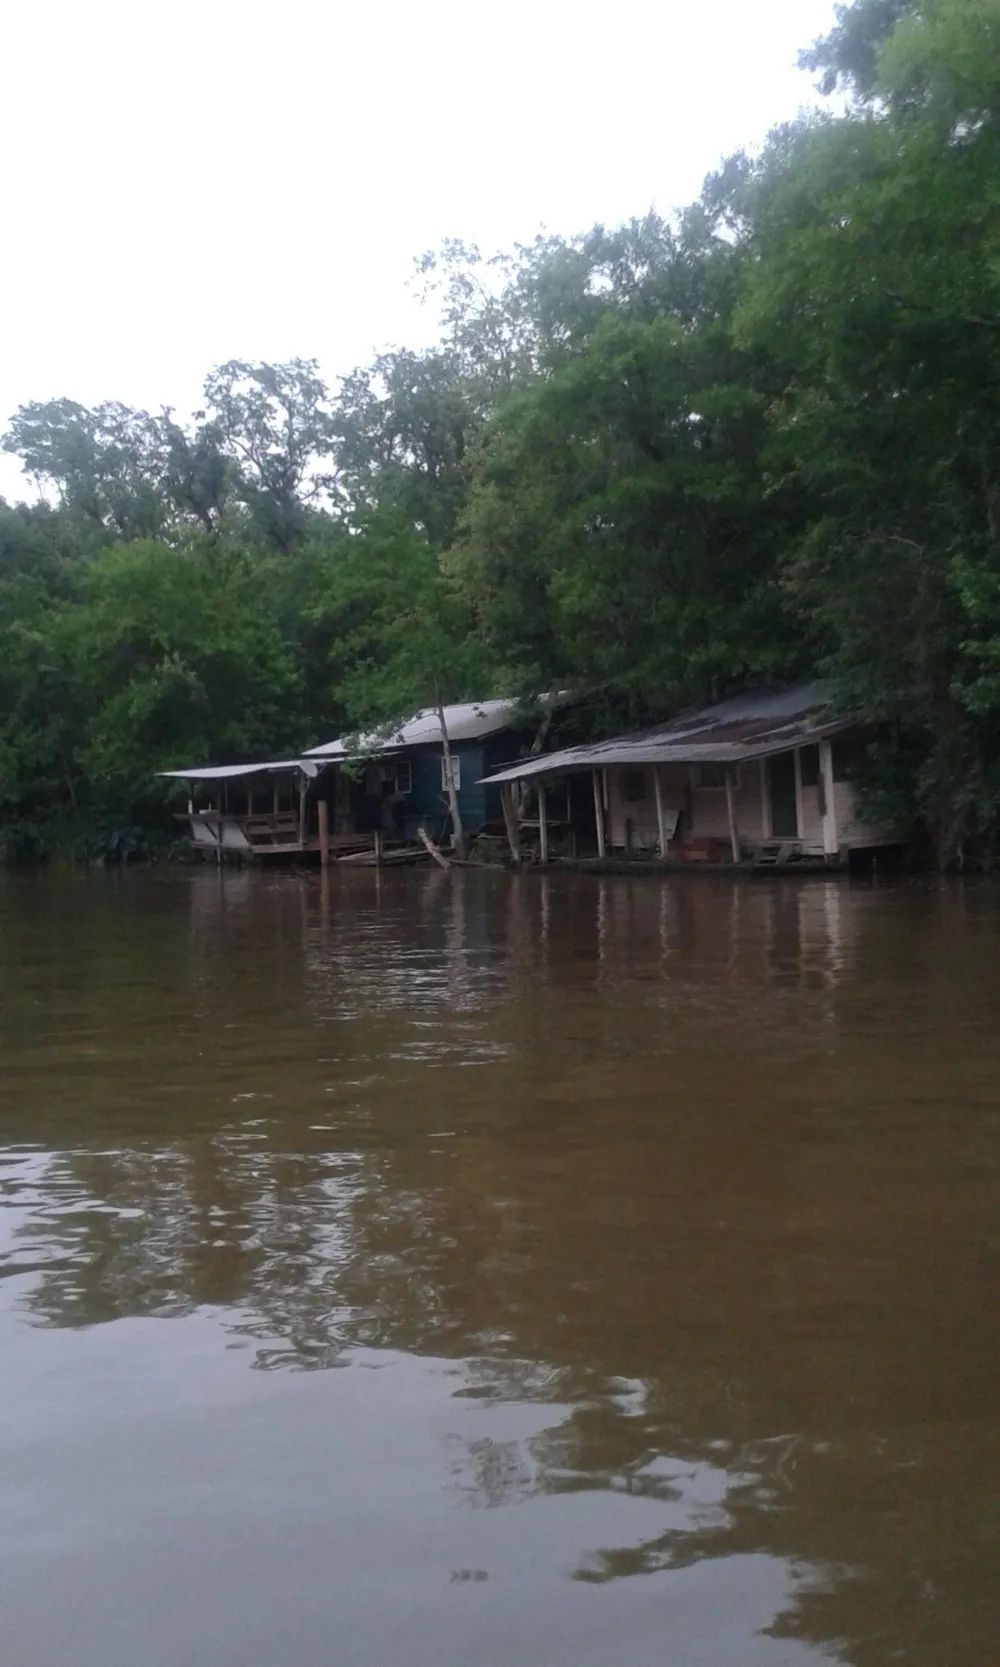 The image shows a waterfront with dilapidated buildings partially submerged in a brown water body surrounded by dense vegetation